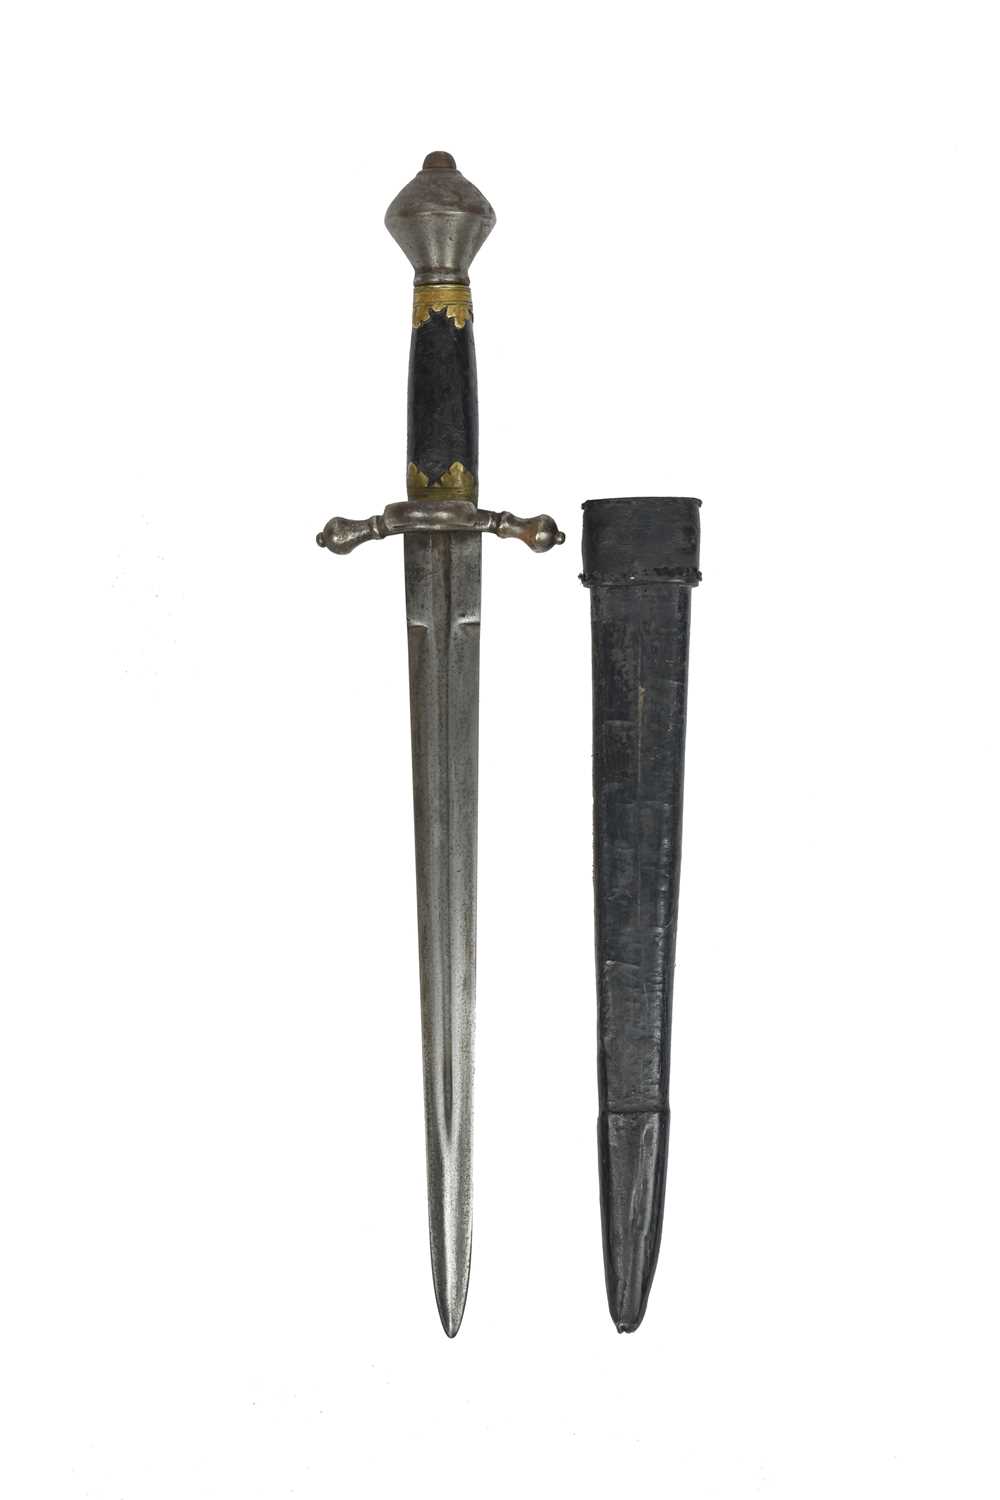 A parrying dagger, double-edged blade 10.75 in., cutler's mark of crossed swords within a shield,